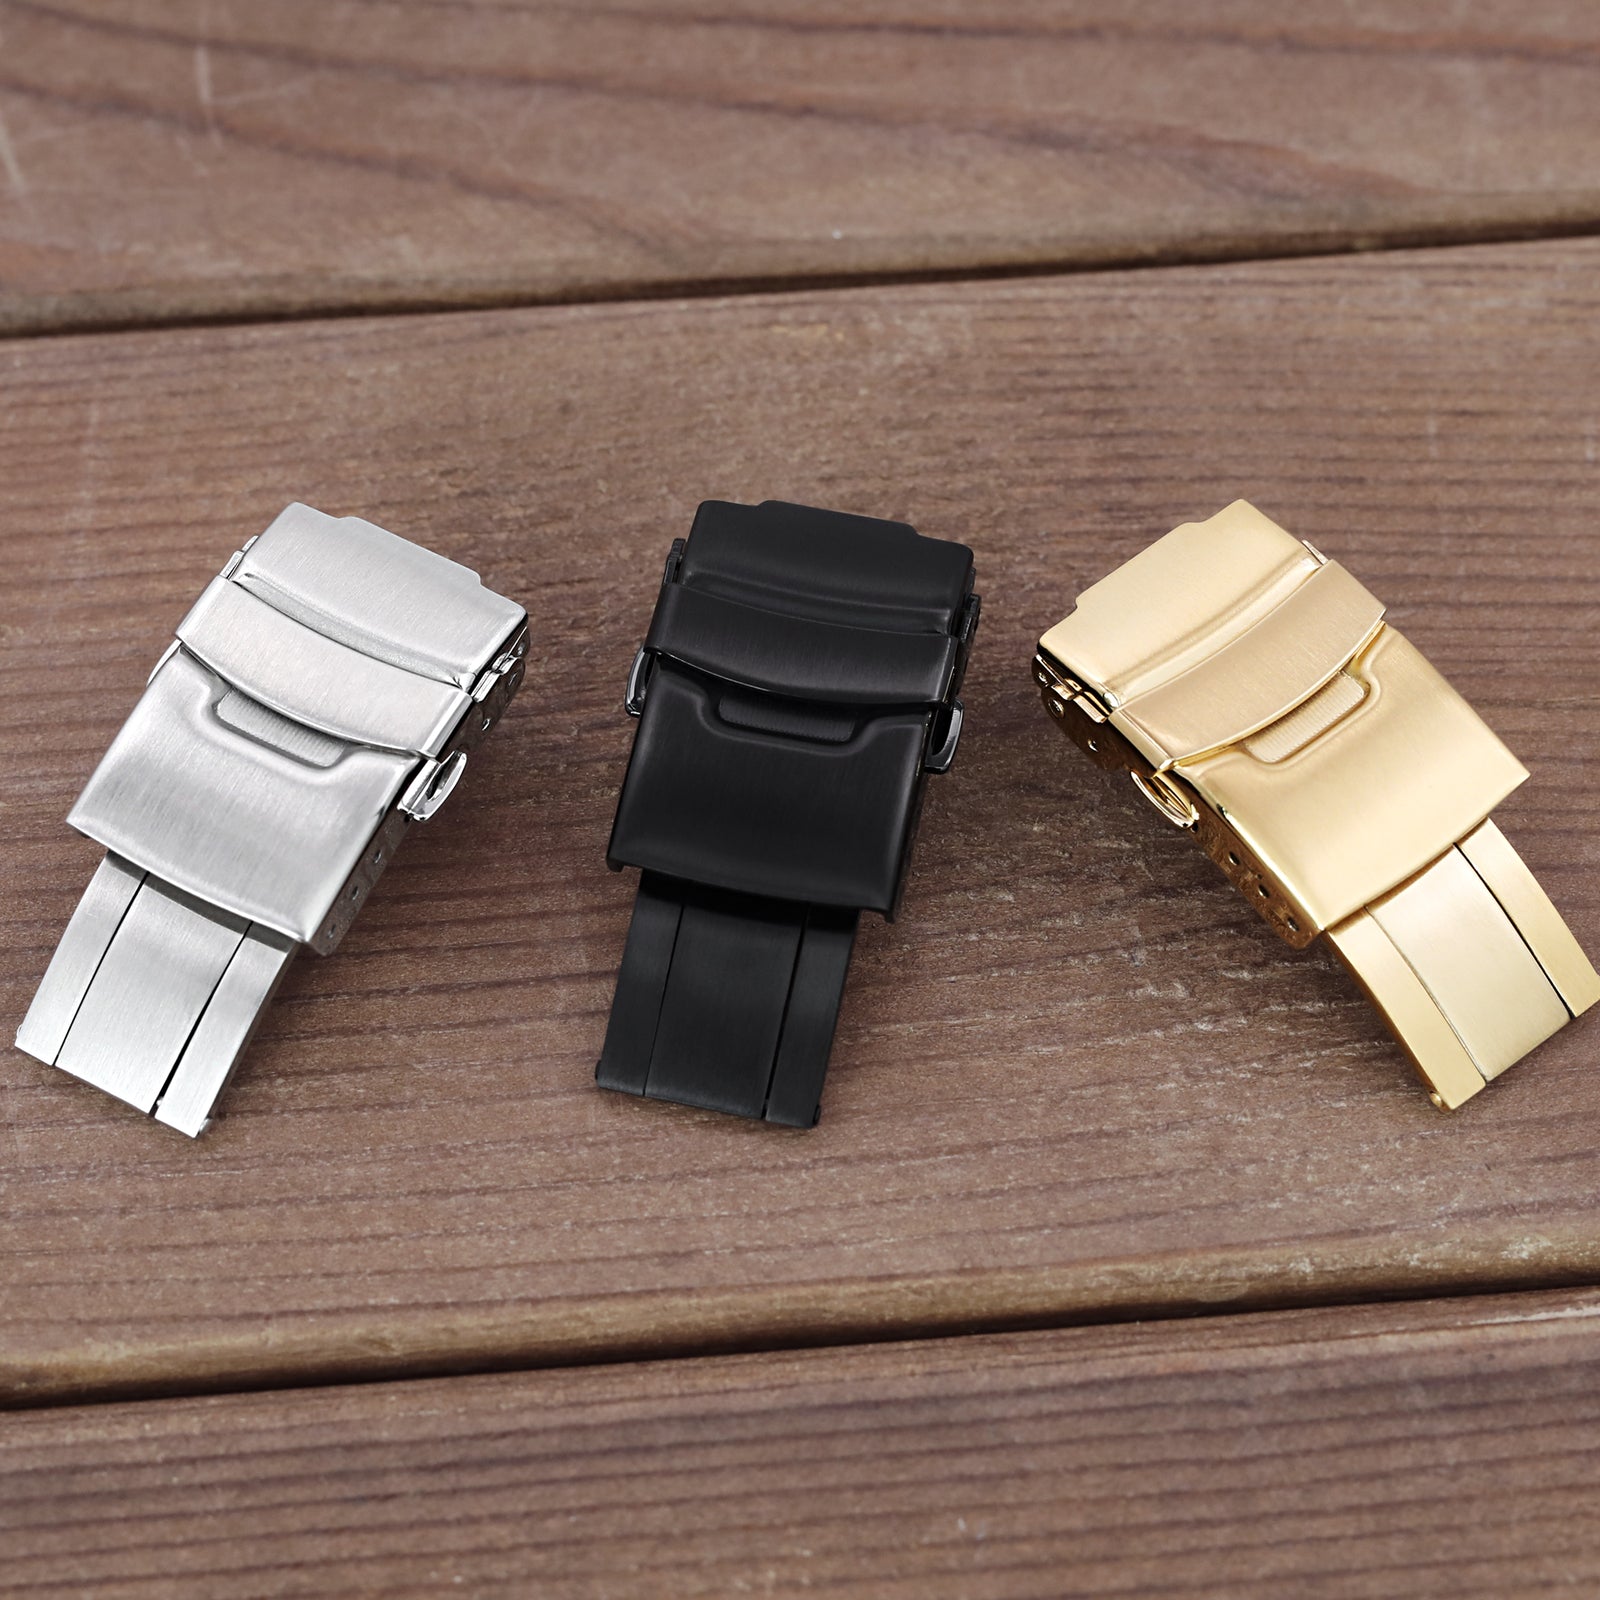 18mm Double Lock Diver Buckle Gold Watch Diver Clasp